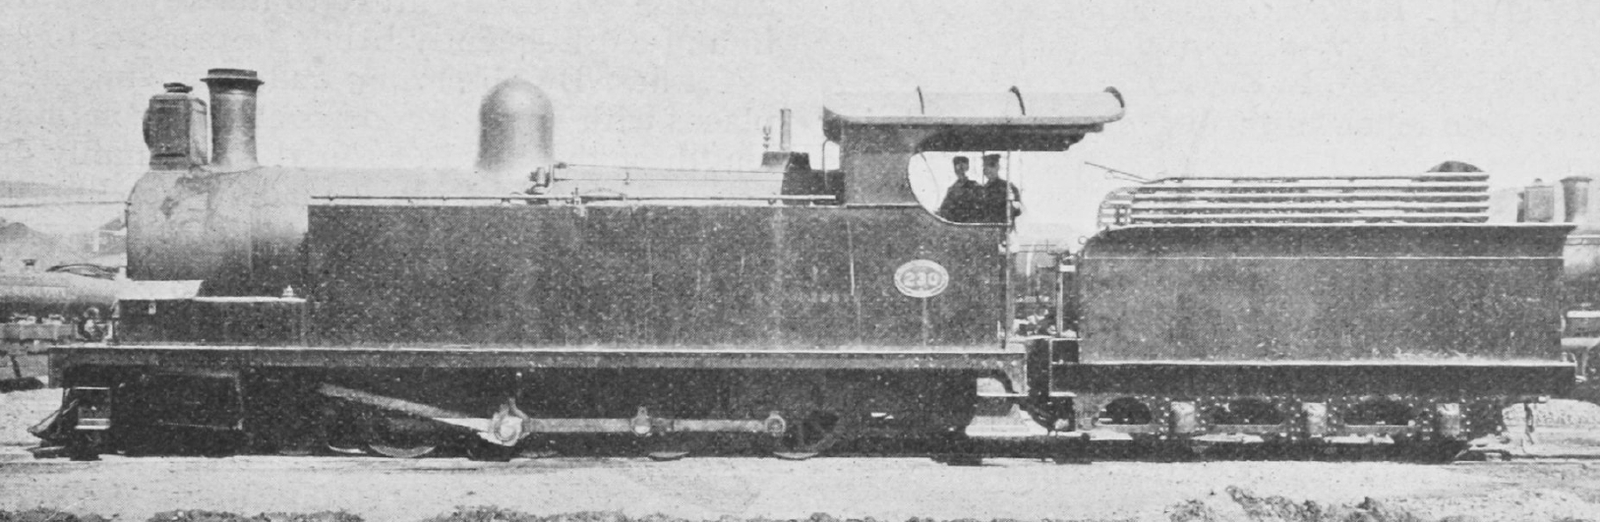 after the rebuilt to 4-8-0TT